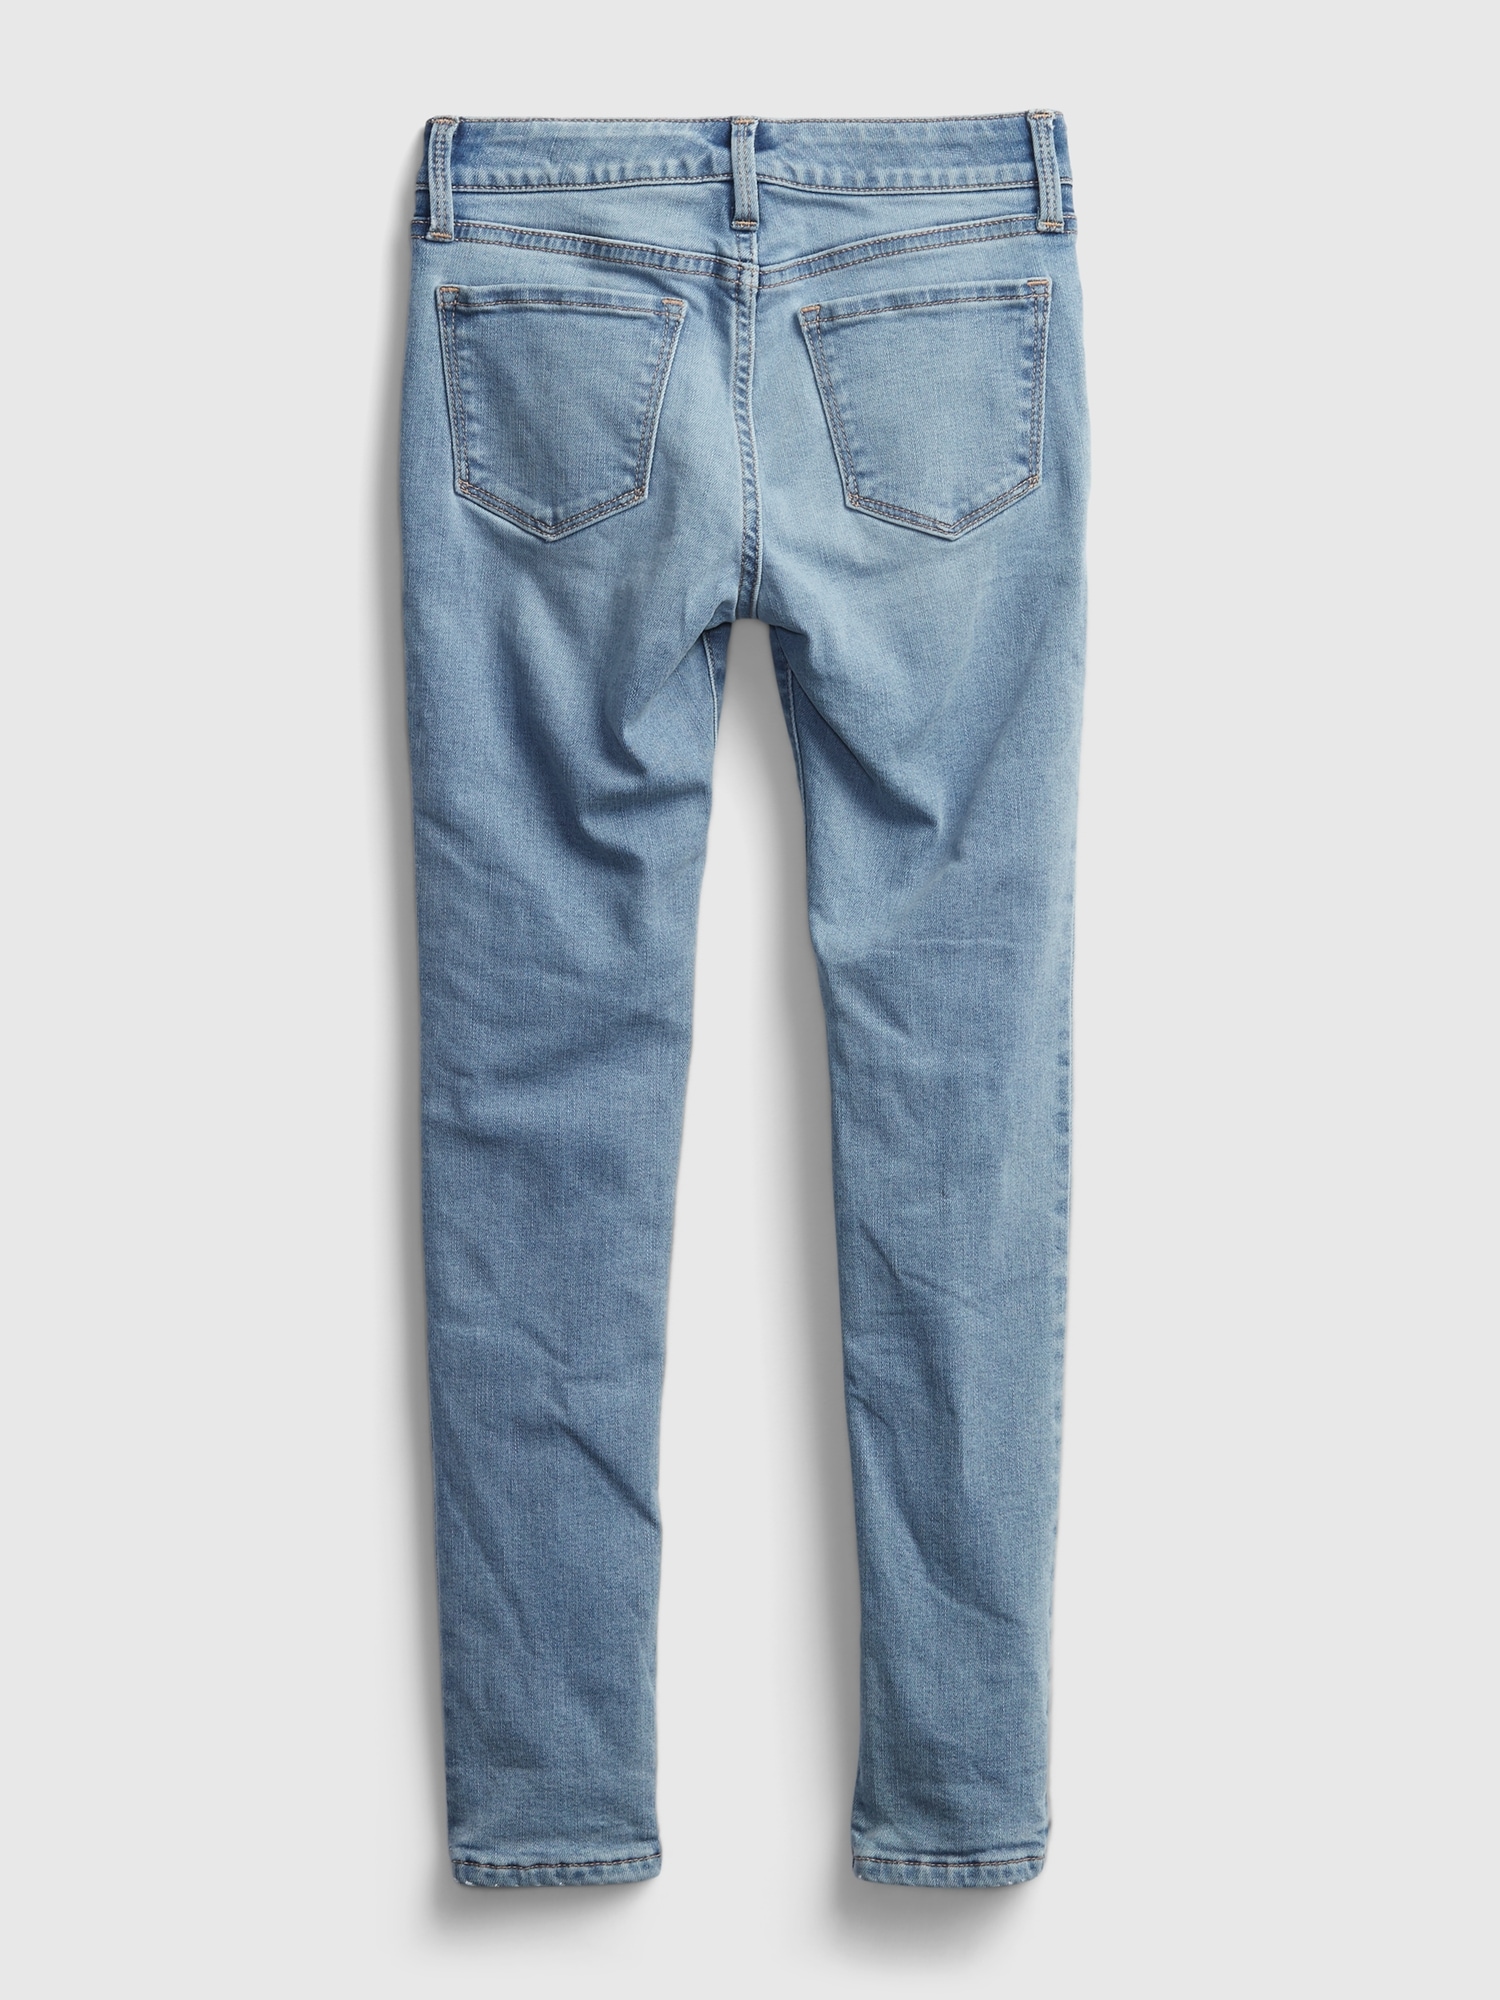 Kids Lined Recycled Super Skinny Jeans 